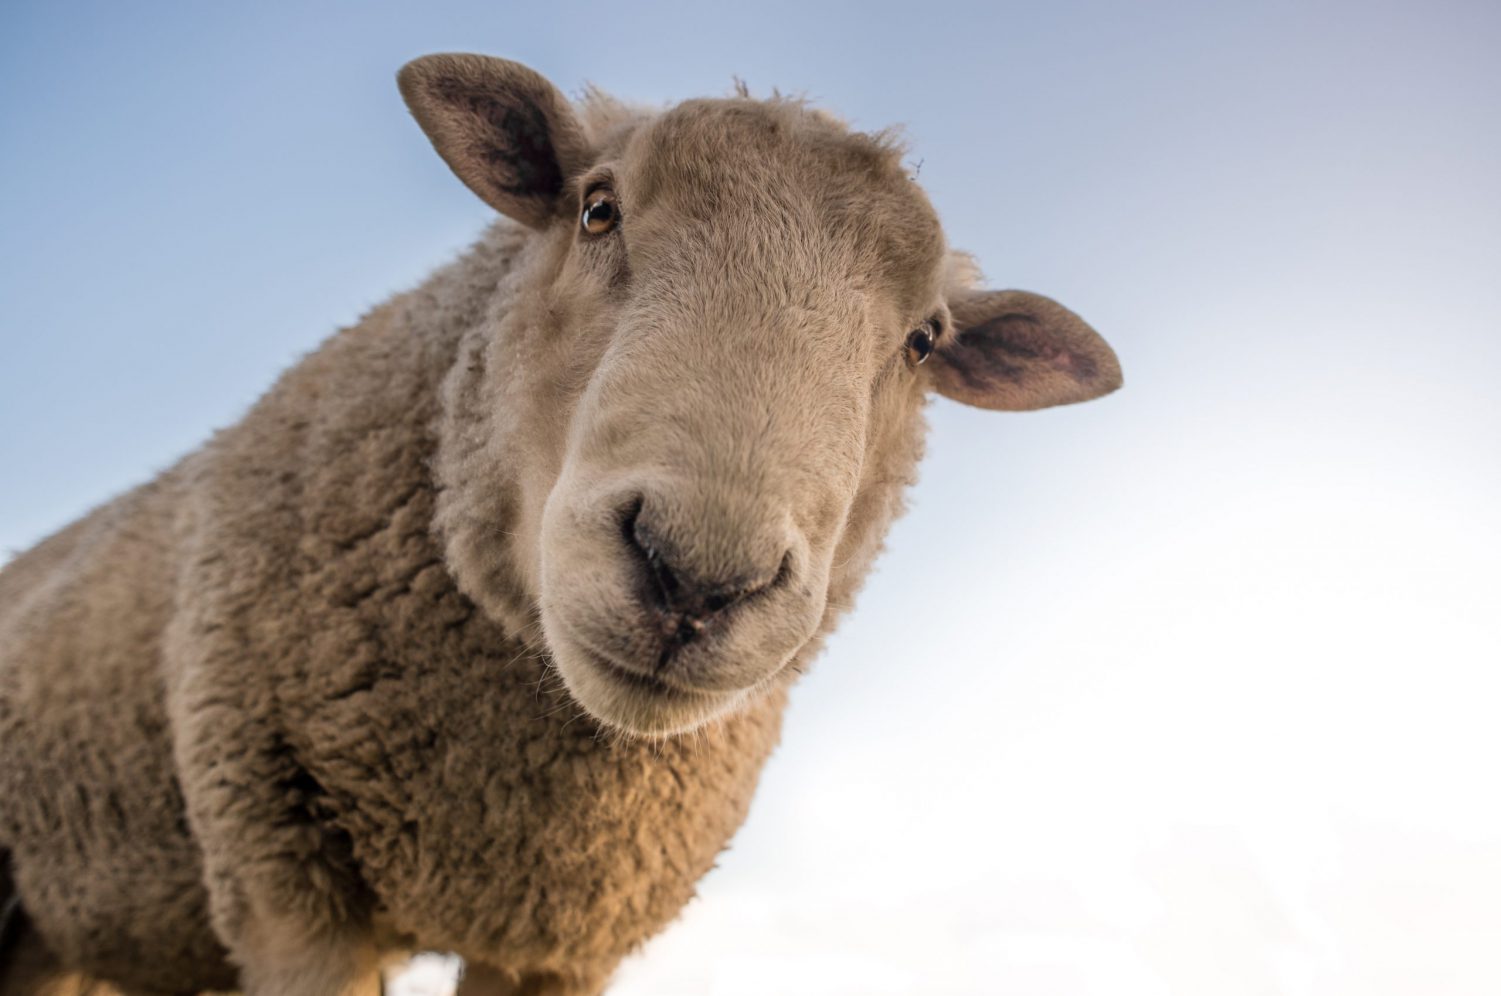 focus-photo-of-brown-sheep-under-blue-sky